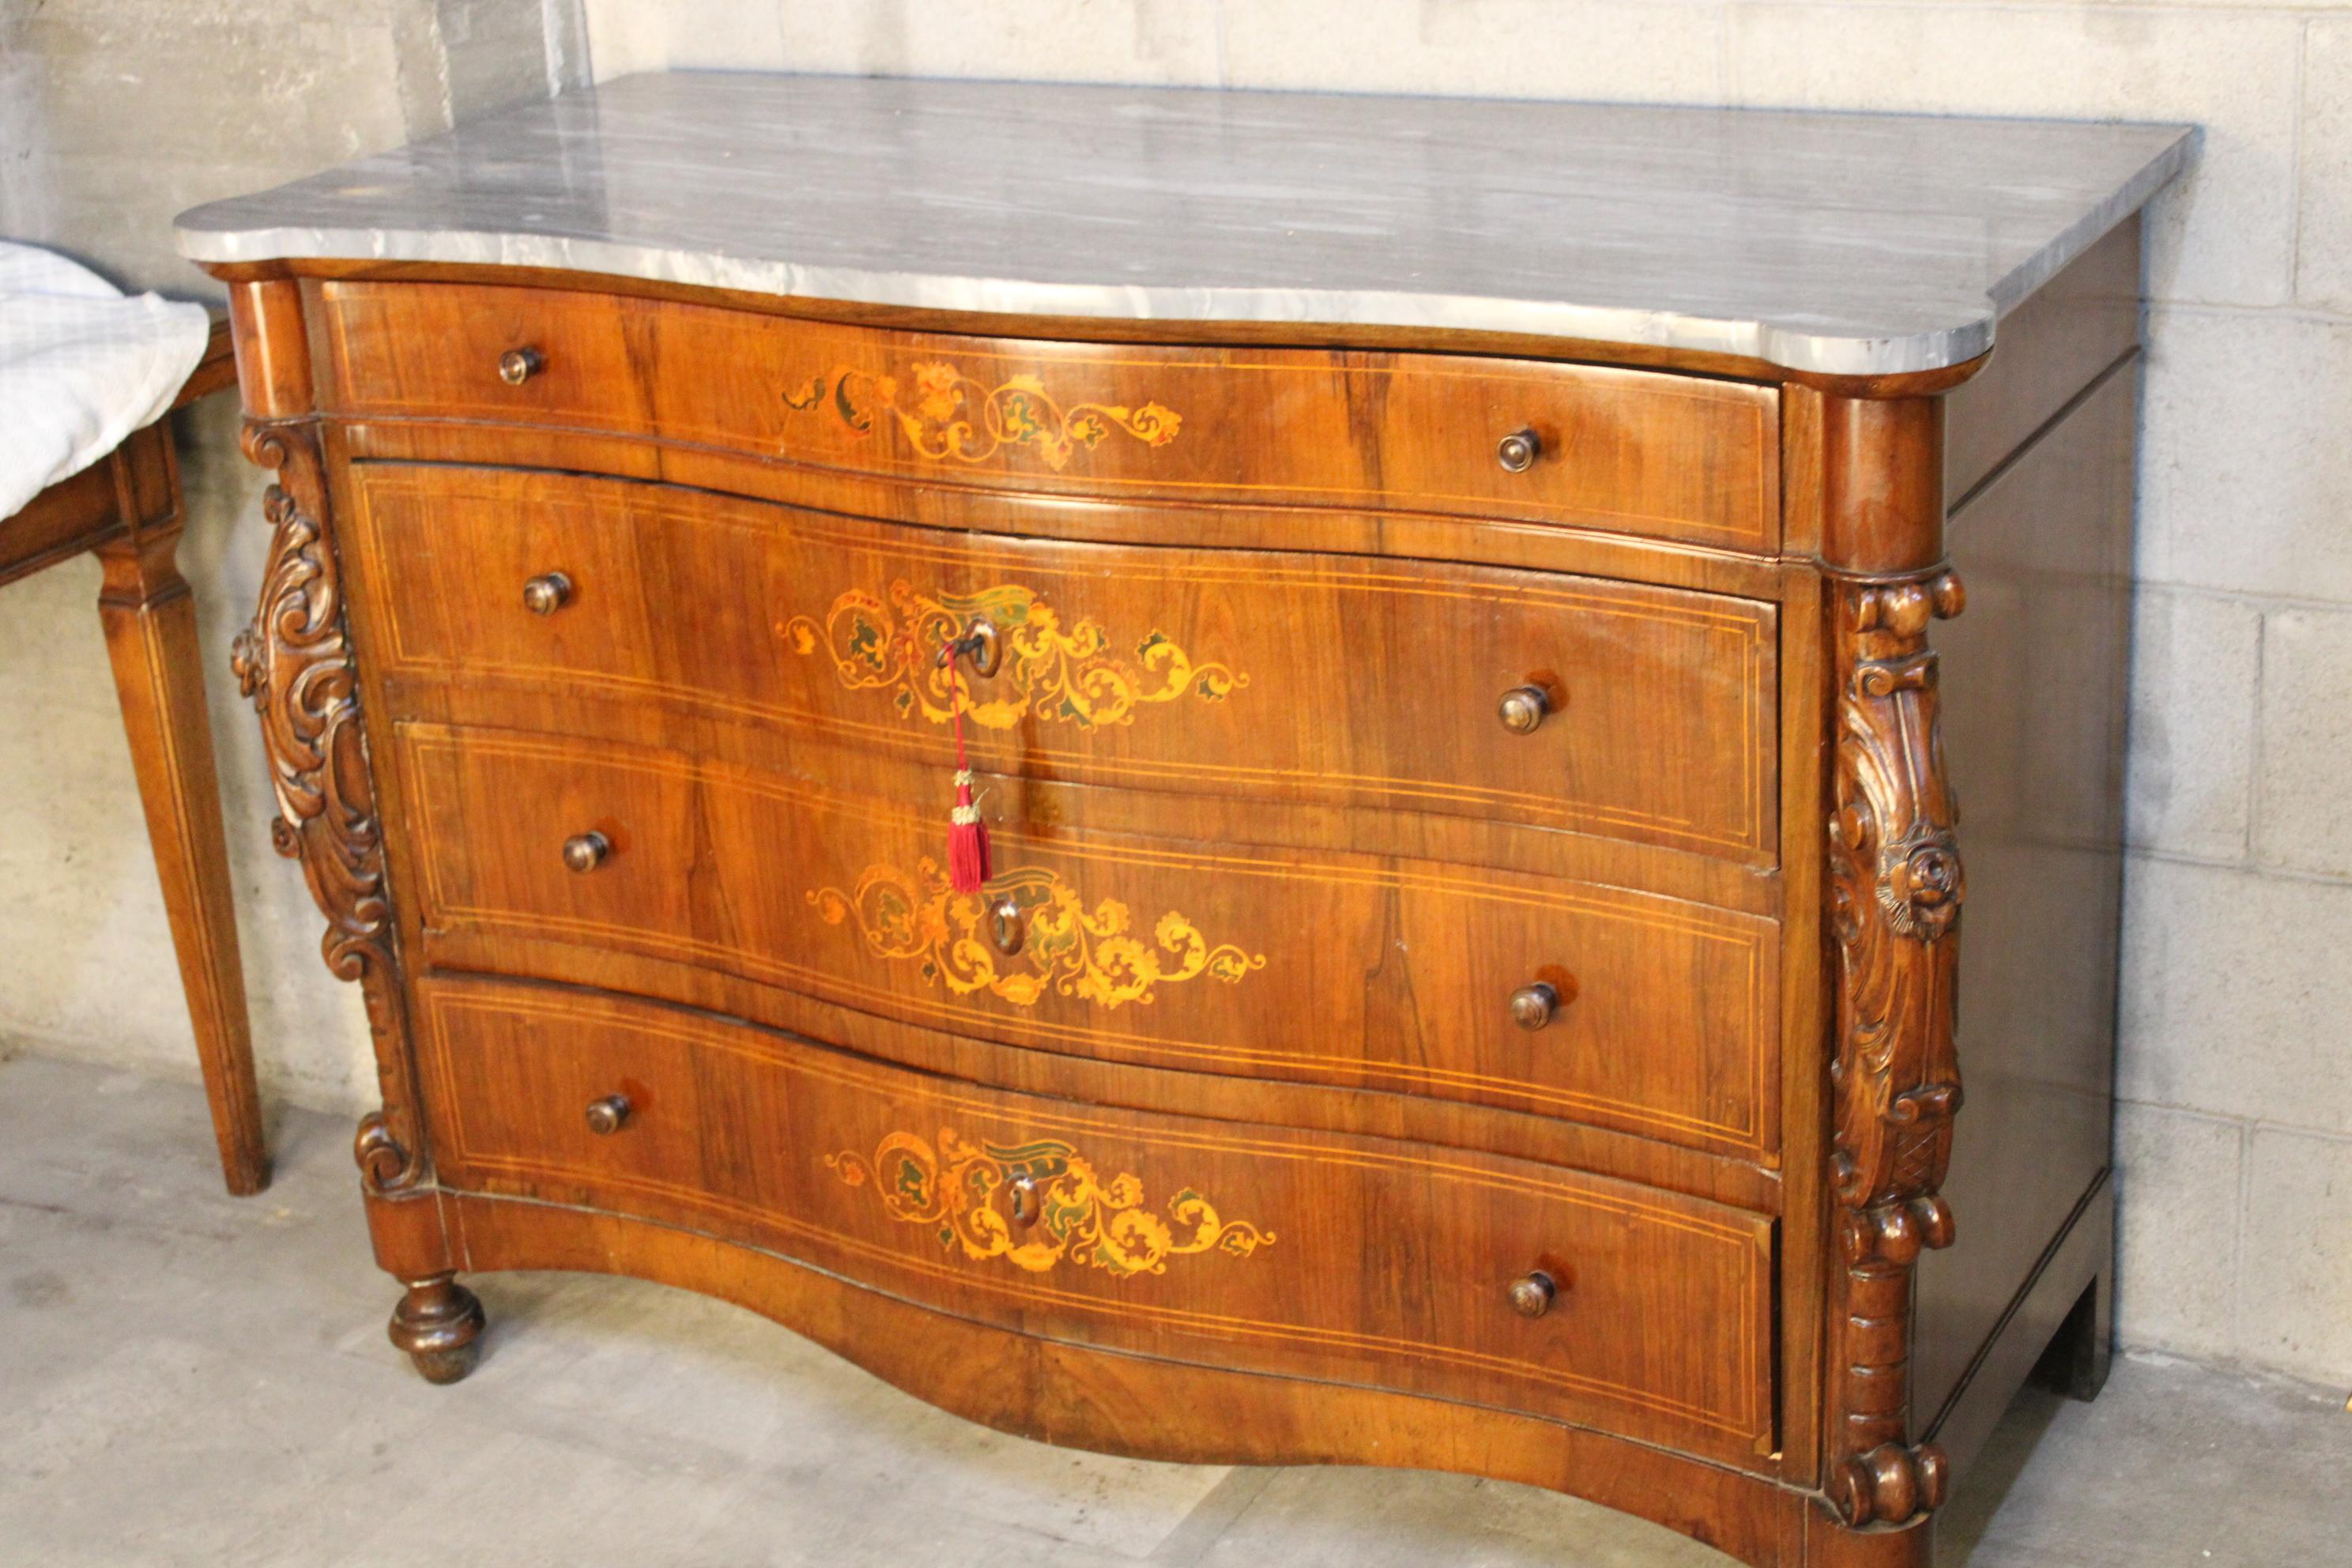 French 19th Century Marquetry Chest of Drawers with an Italian Carrara Marble